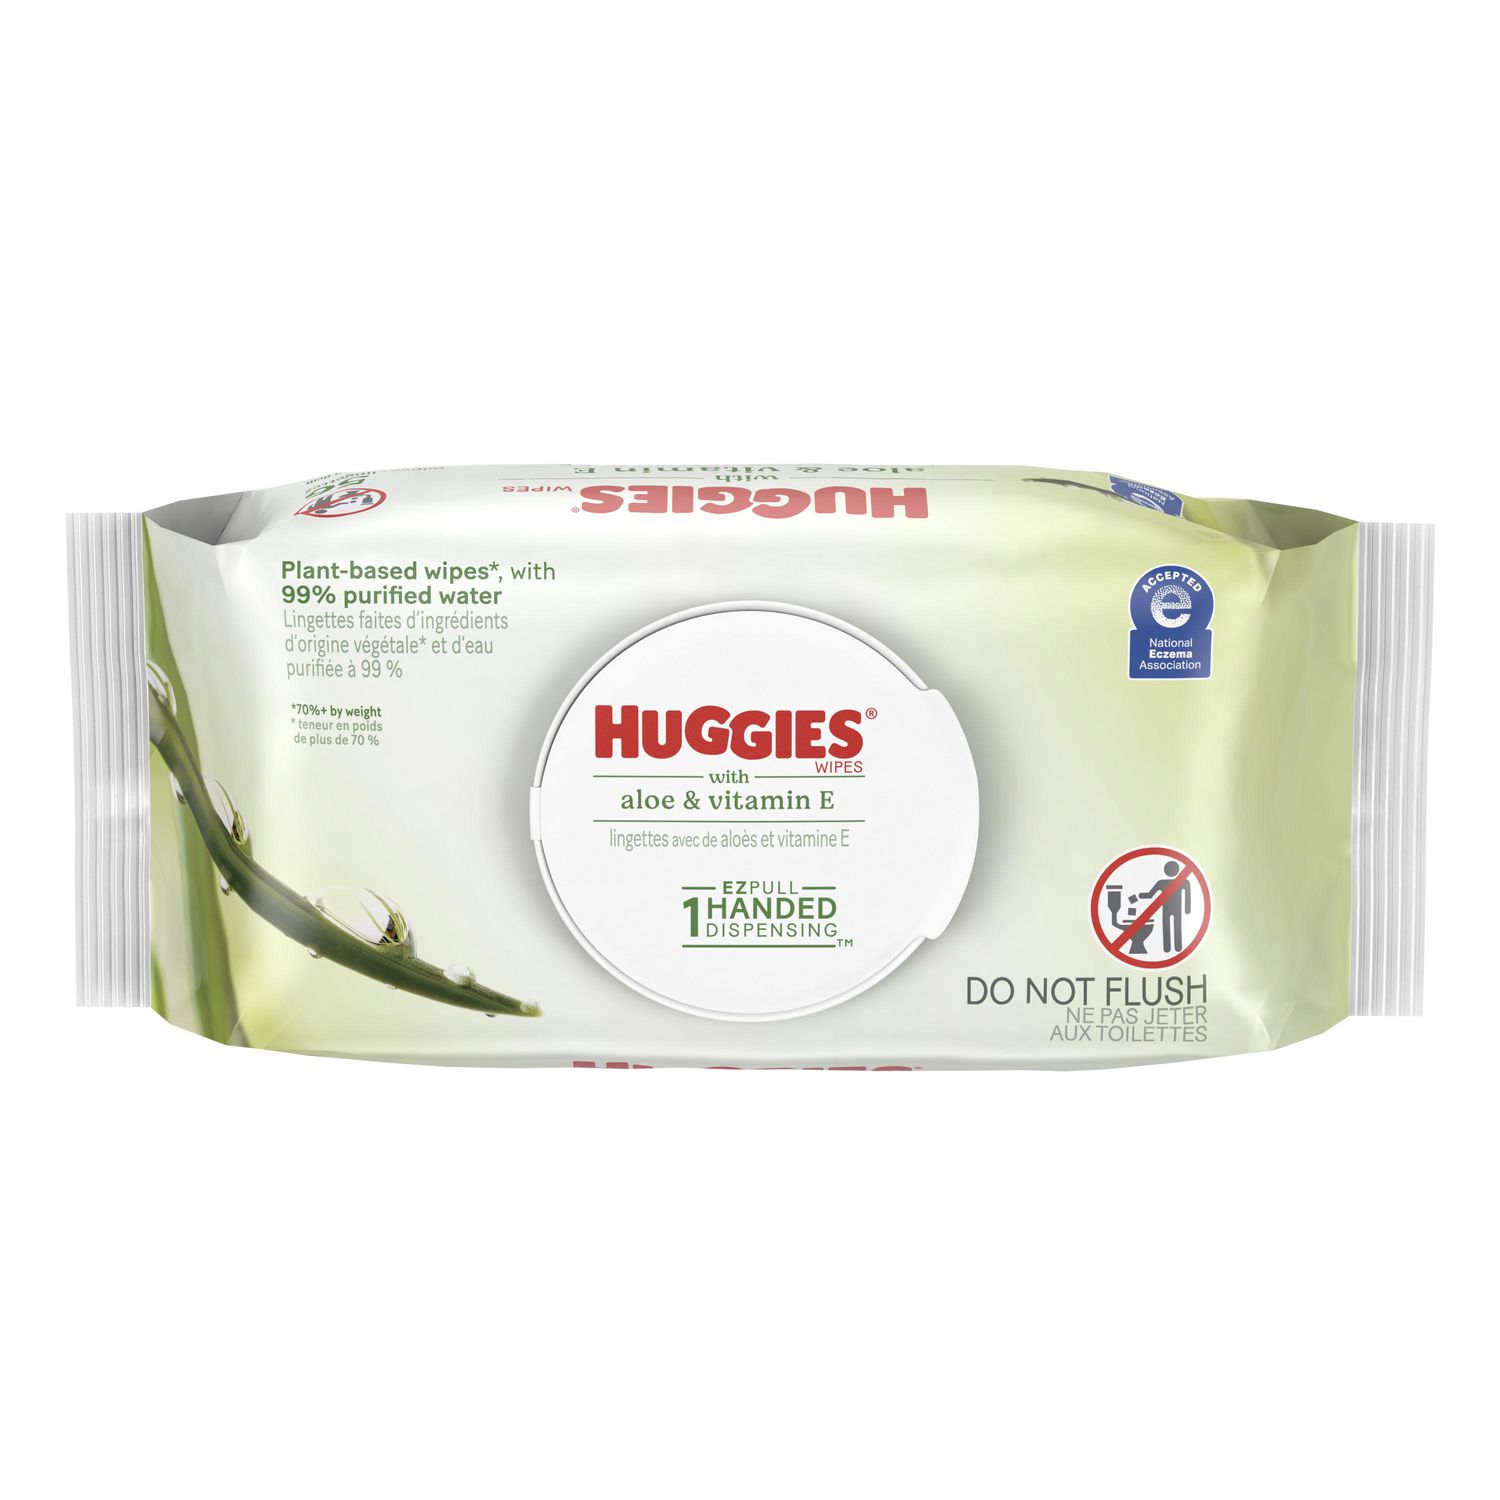 Baby Wipes - 288ct, Honest baby wipes provide the convenience of a  disposable cloth baby wipe in a plant-based and hypoallergenic alternative.  